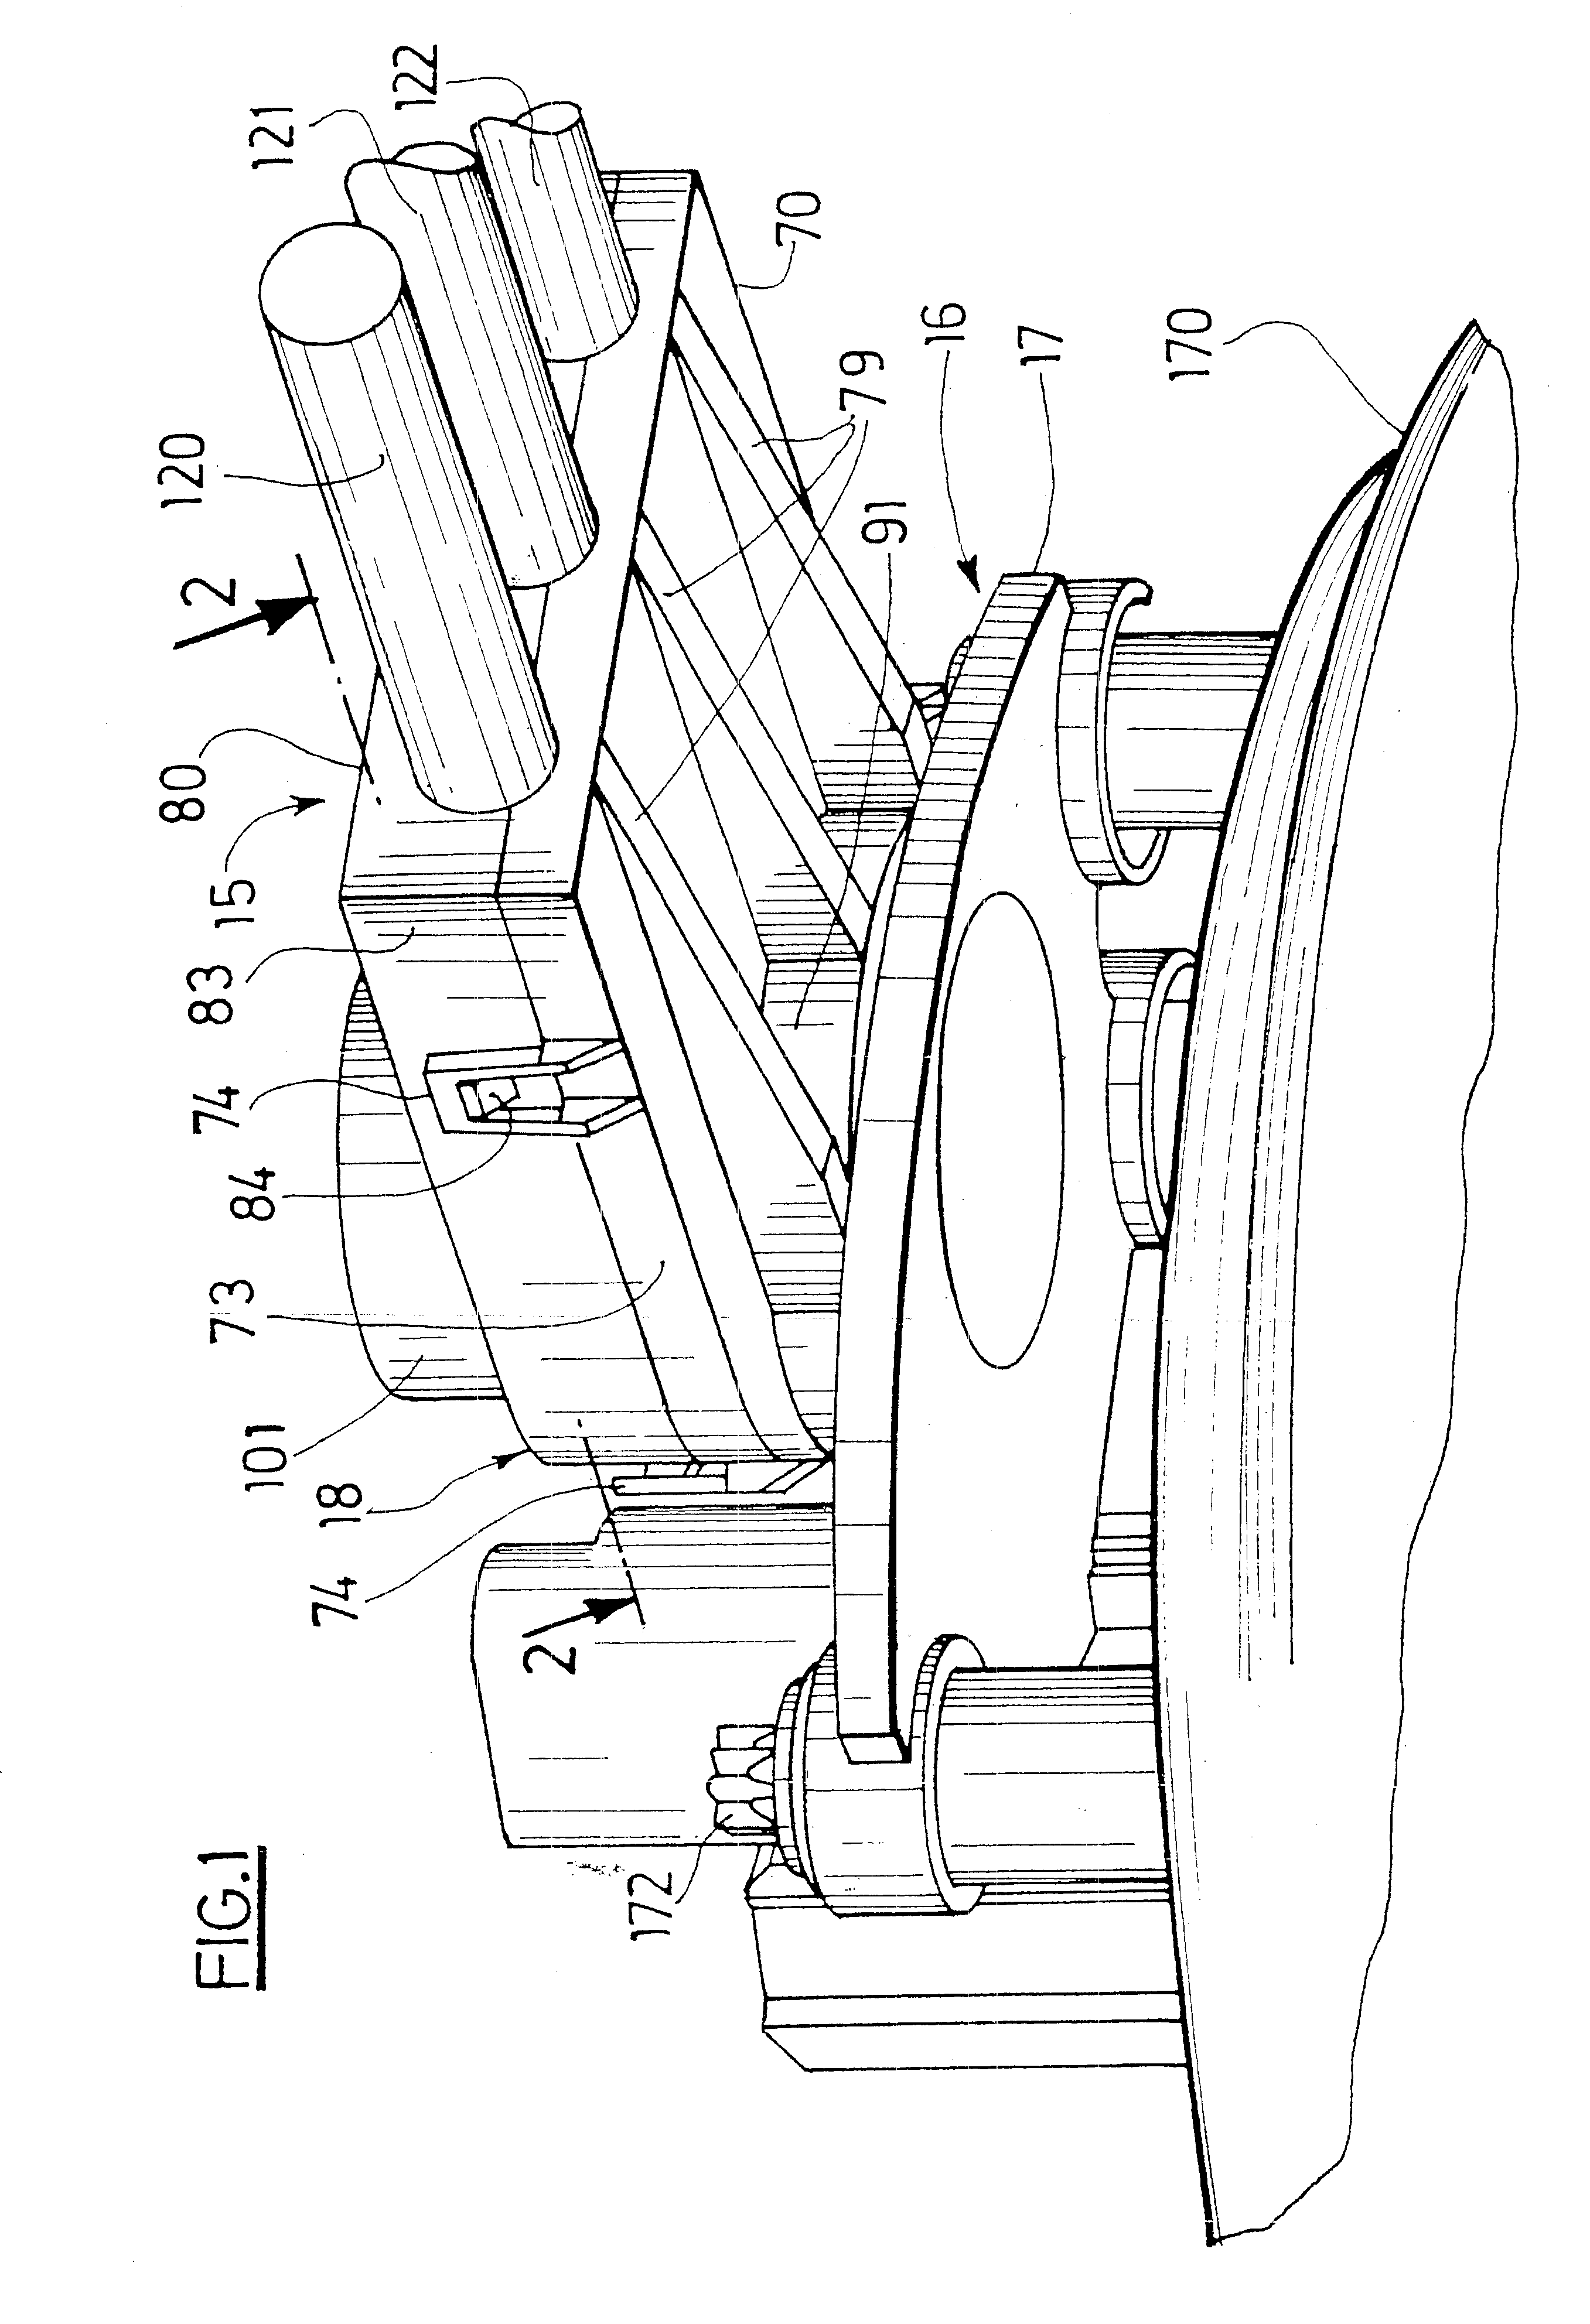 Multicontact electrical connector and rotating electrical machine bearing same